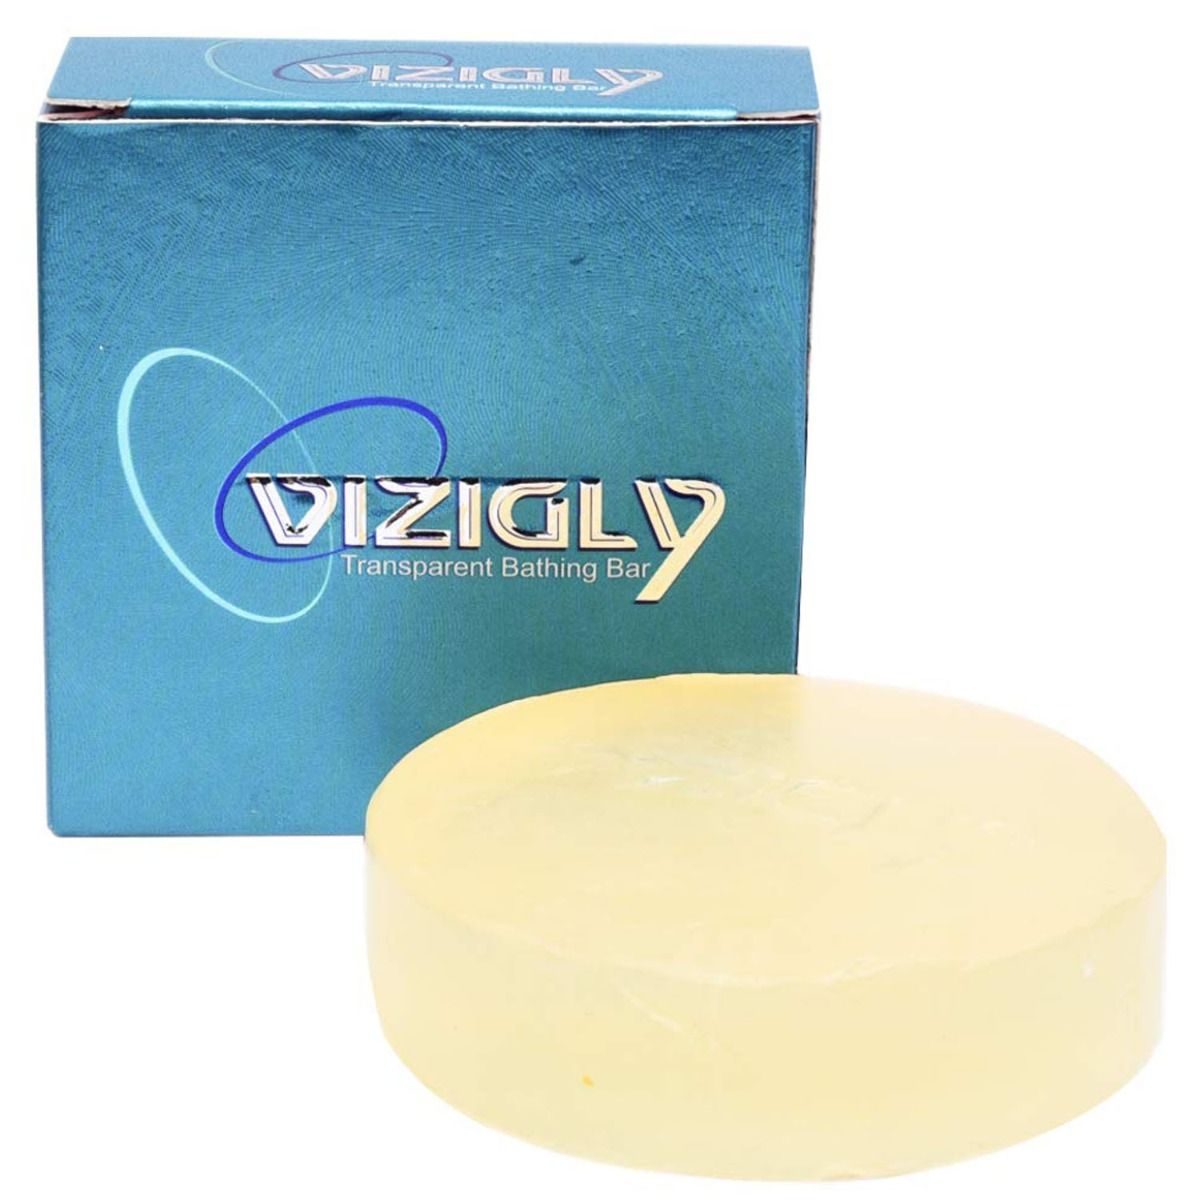 Vizigly Soap, 75 gm, Pack of 1 